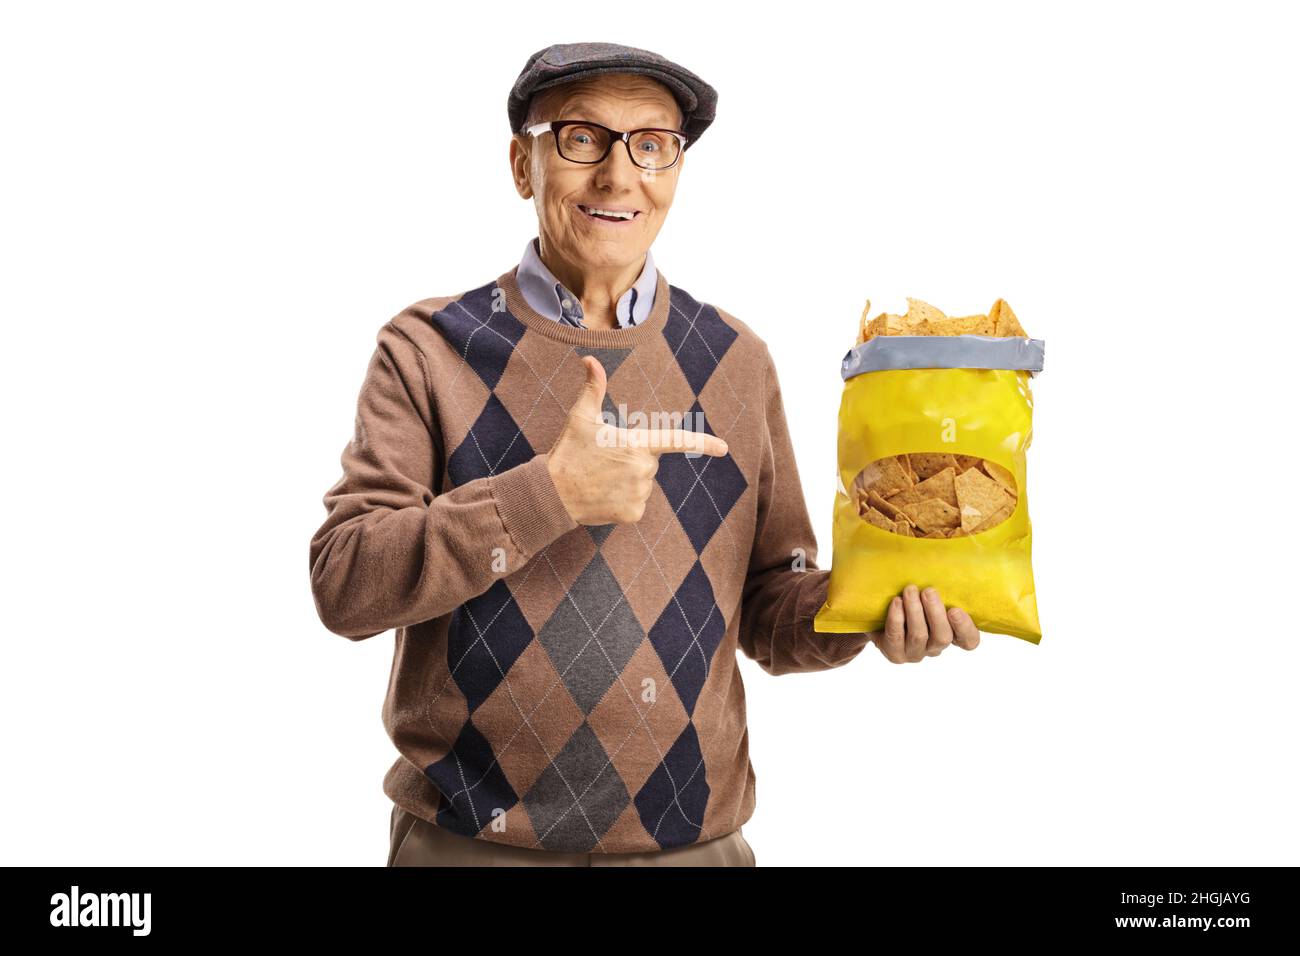 Cheerful elderly man holding a pack of tortilla chips and pointing isolated on white background Stock Photo